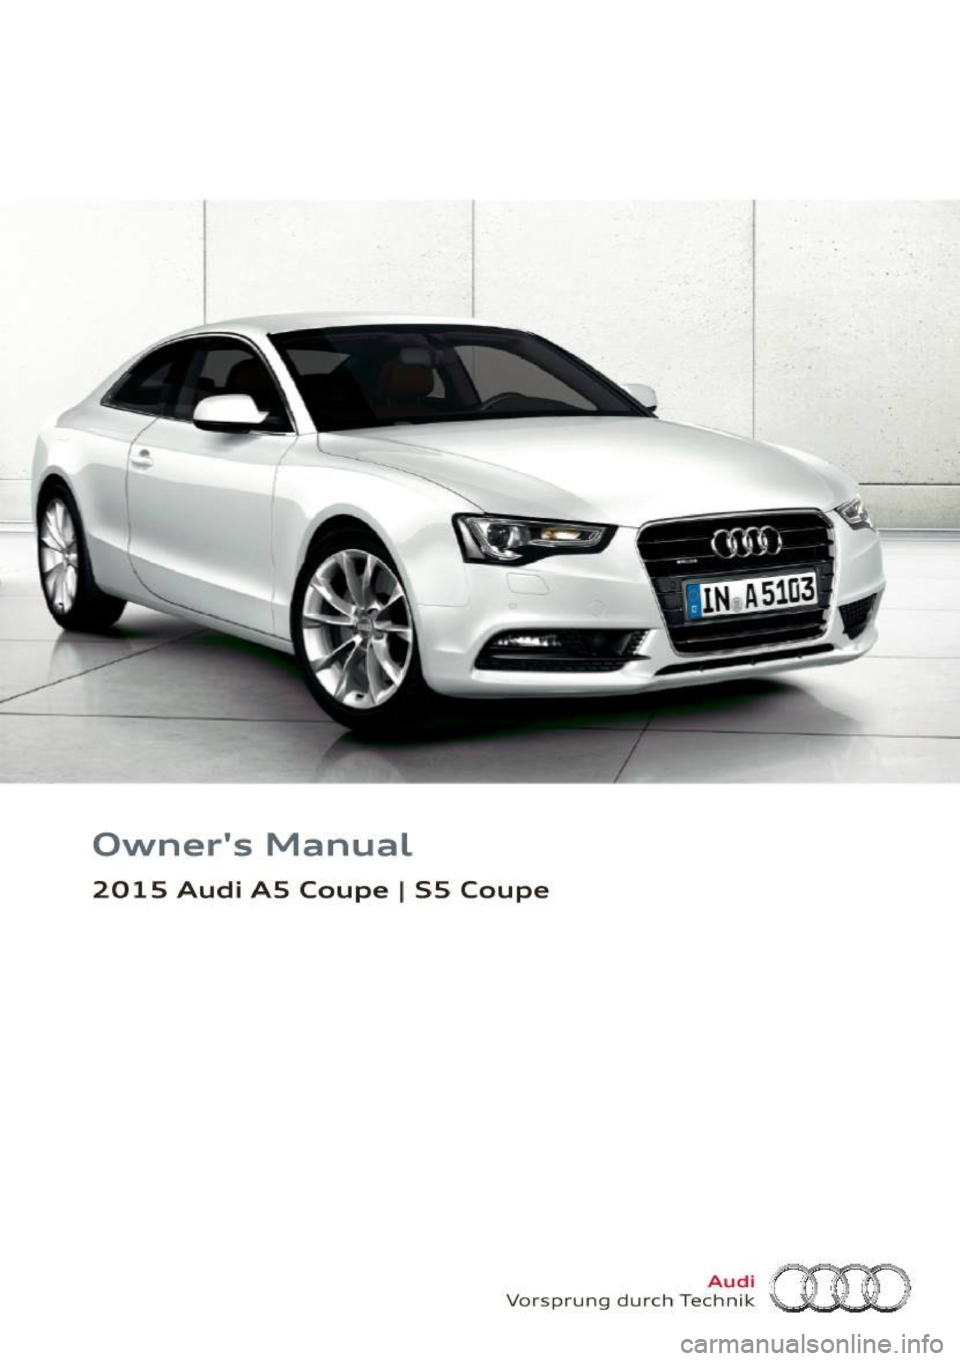 AUDI A5 2015  Owner´s Manual Owners  Manual 
2015  Audi  AS  Coupe I 55  Coupe 
Vors prung  durch  Tee~~?~ (HD  